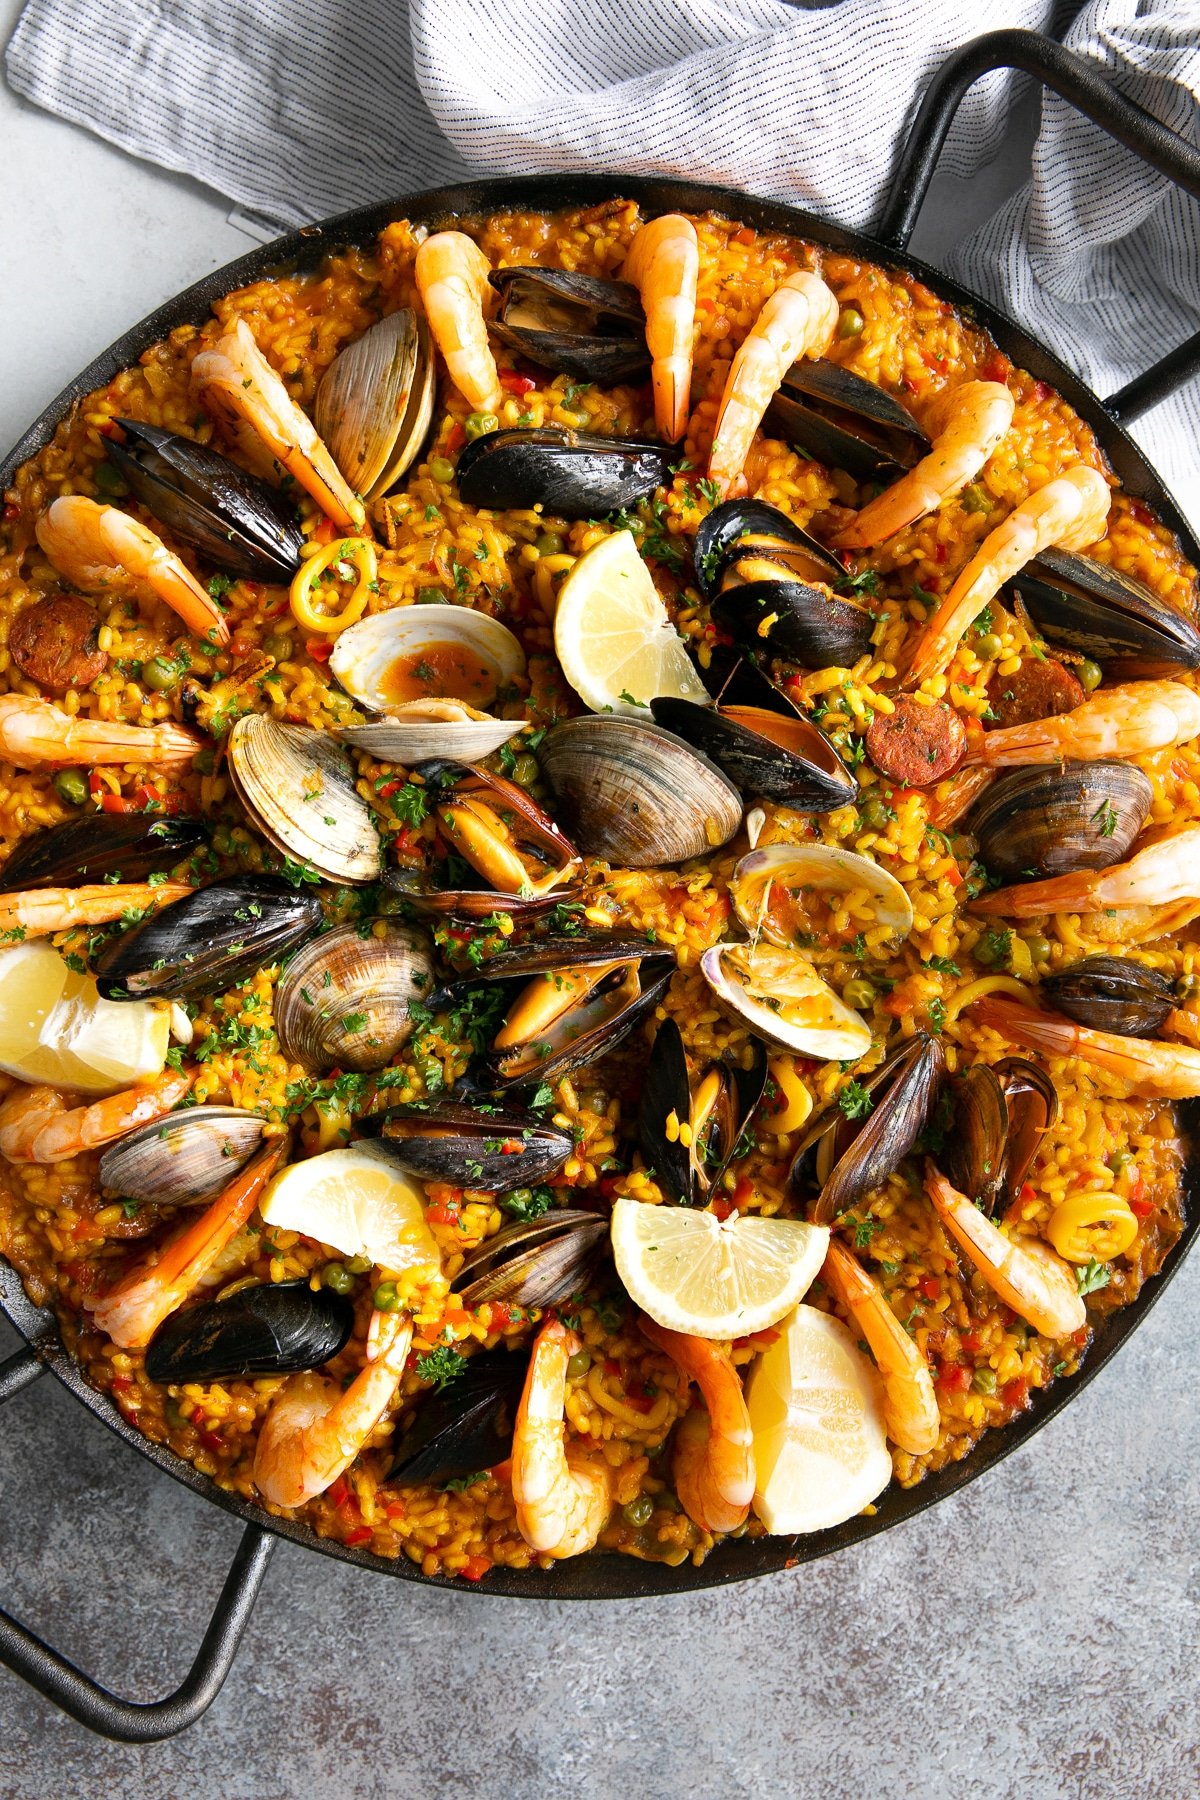 Paella Recipe - How to Make Spanish Paella - The Forked Spoon